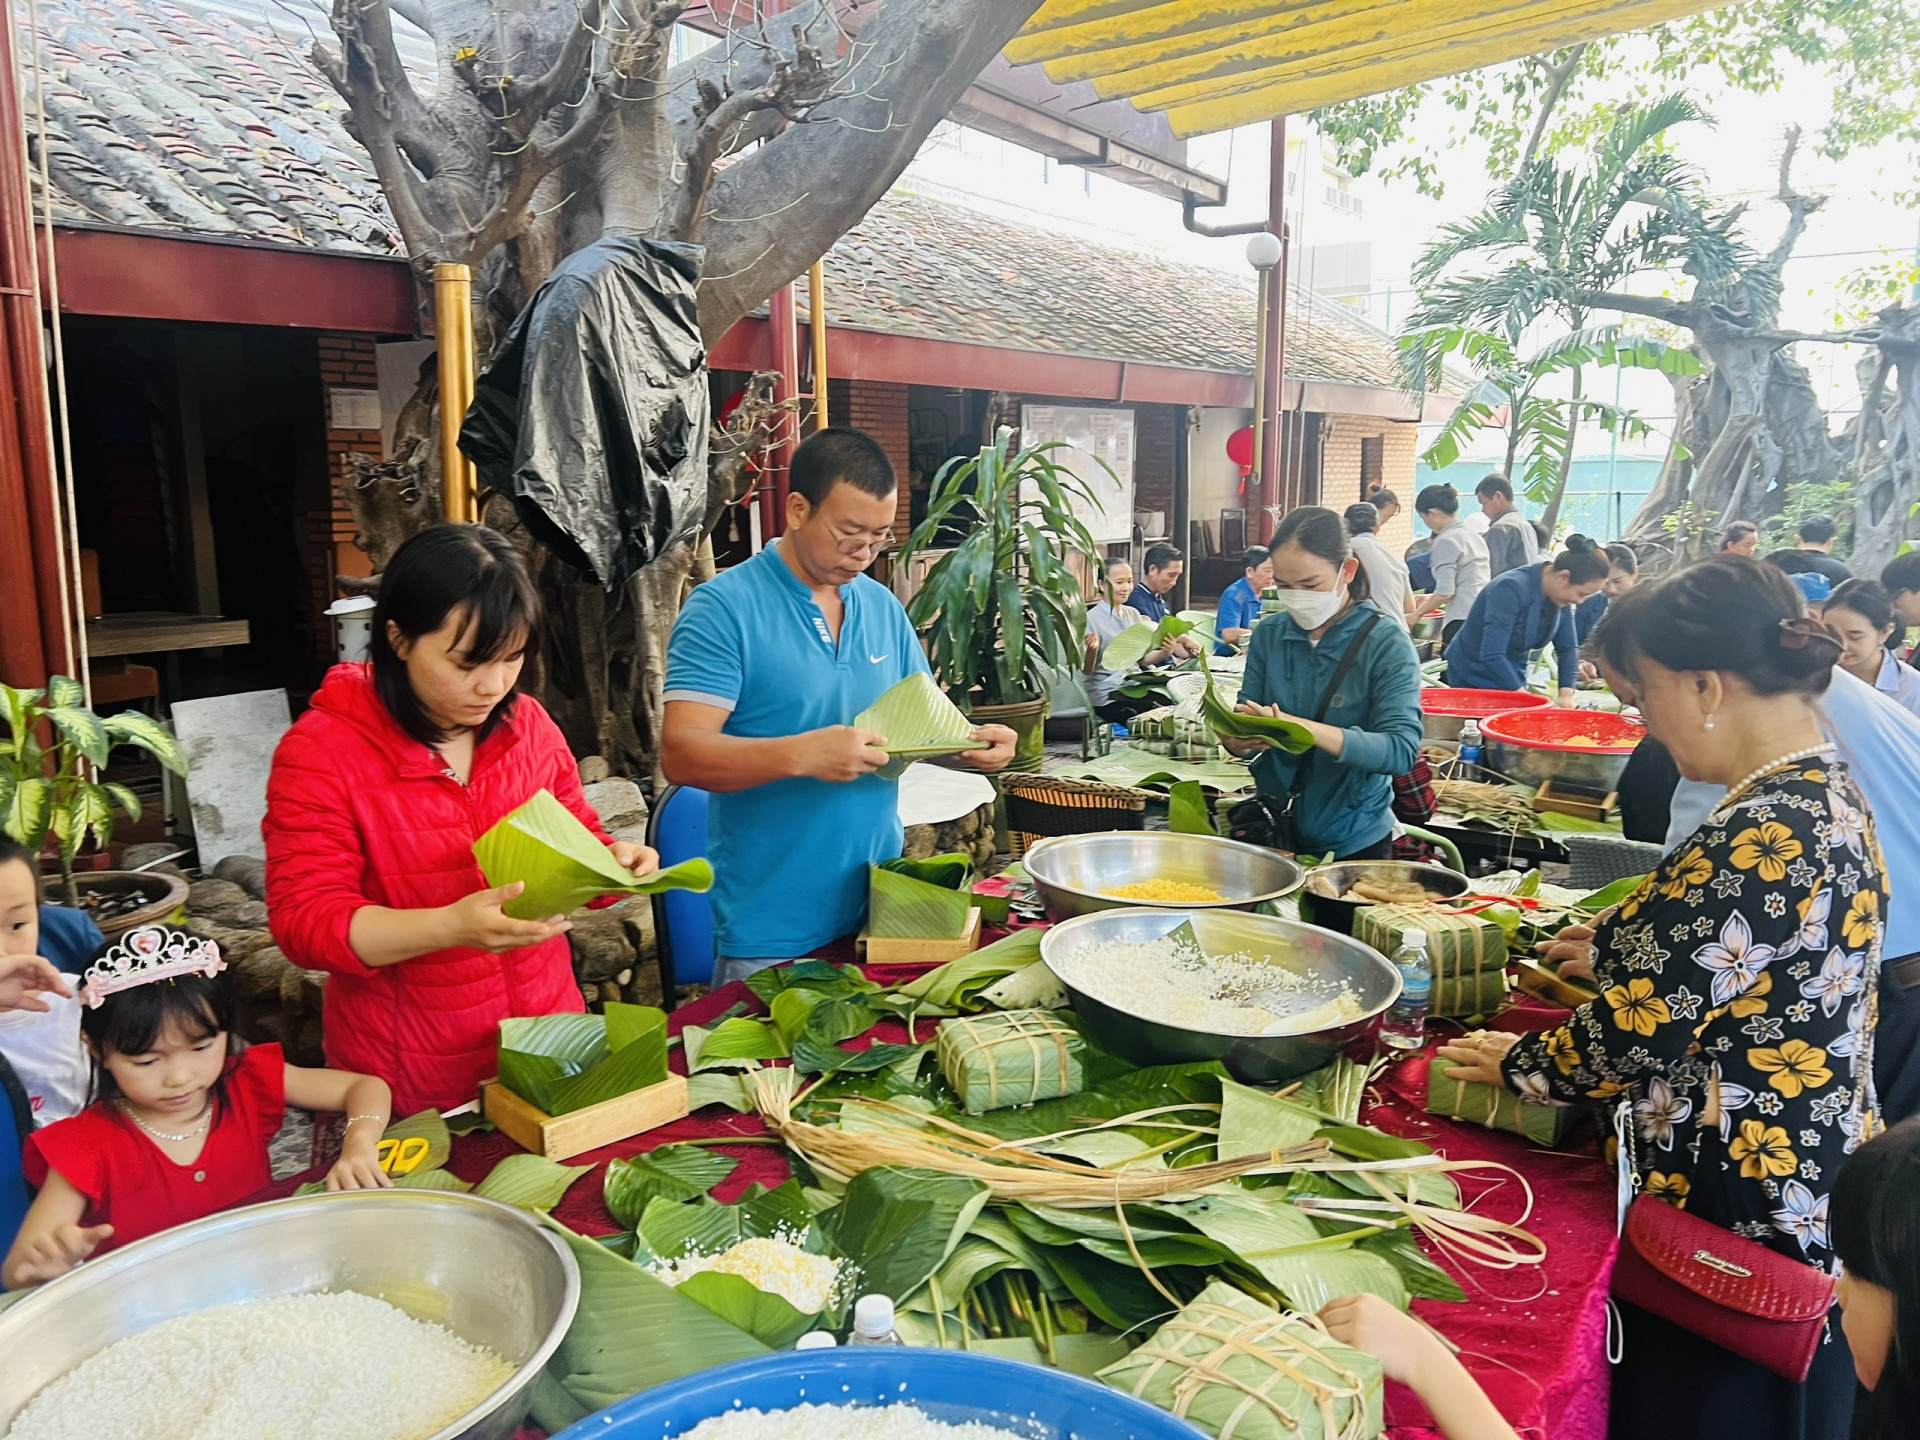 Many people join “Banh Chung” Festival